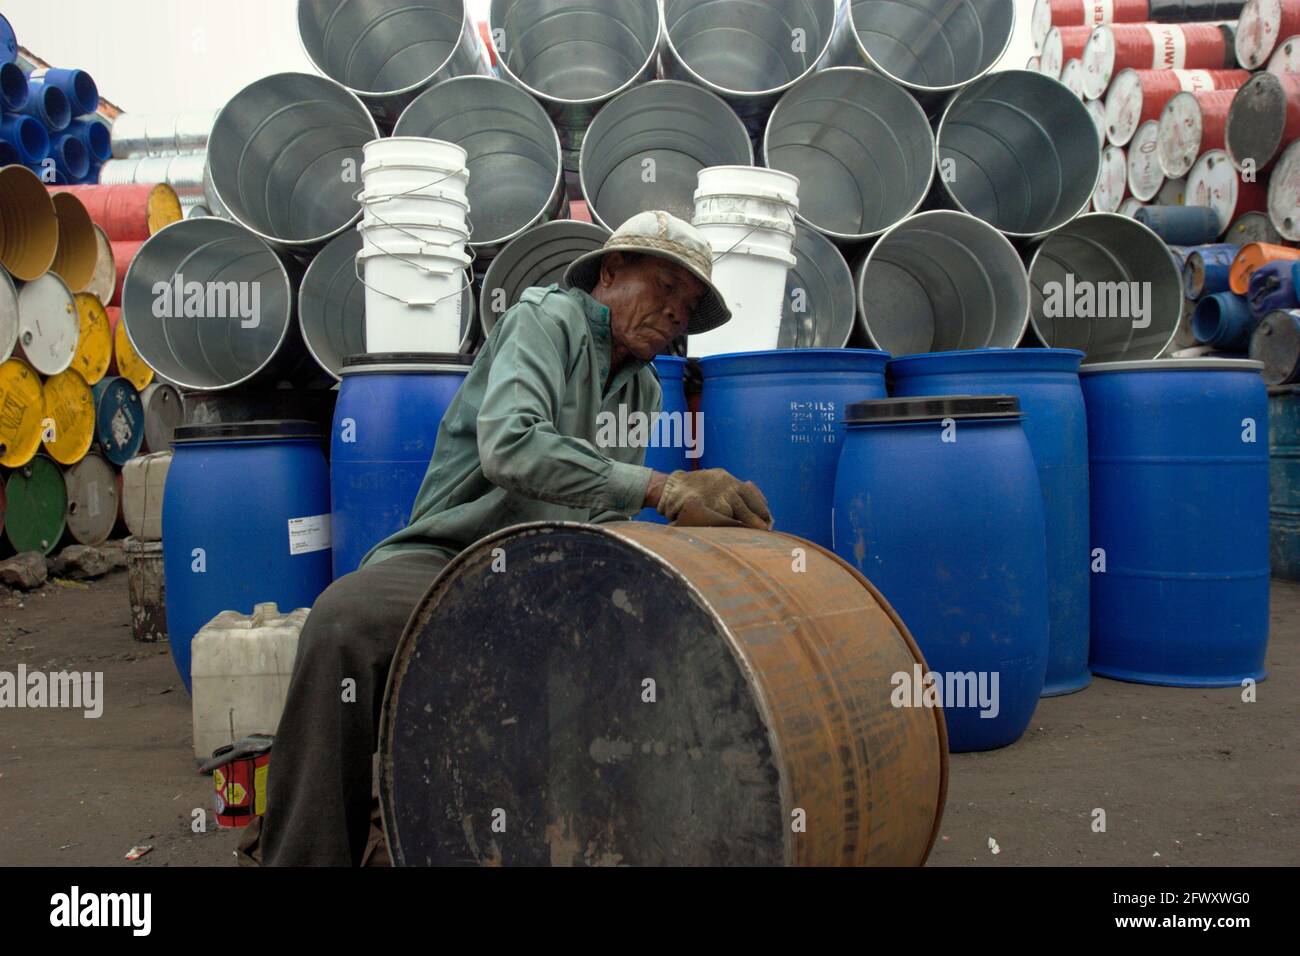 A worker cleaning a container drum at a used items trading shop in Surabaya, East Java, an Indonesian province that is seen as 'global hotspot' facing 'very significant climate change adaptation challenges' in a 2021 scientific assessment focusing on climate risk, which was published by The World Bank Group and Asian Development Bank. The rising temperature will disproportionately affect the poorest groups in society. Manual labor workers working at open spaces--commonly among the lowest paid--are among the communities being most at risk of having productivity losses due to heat stress. Stock Photo